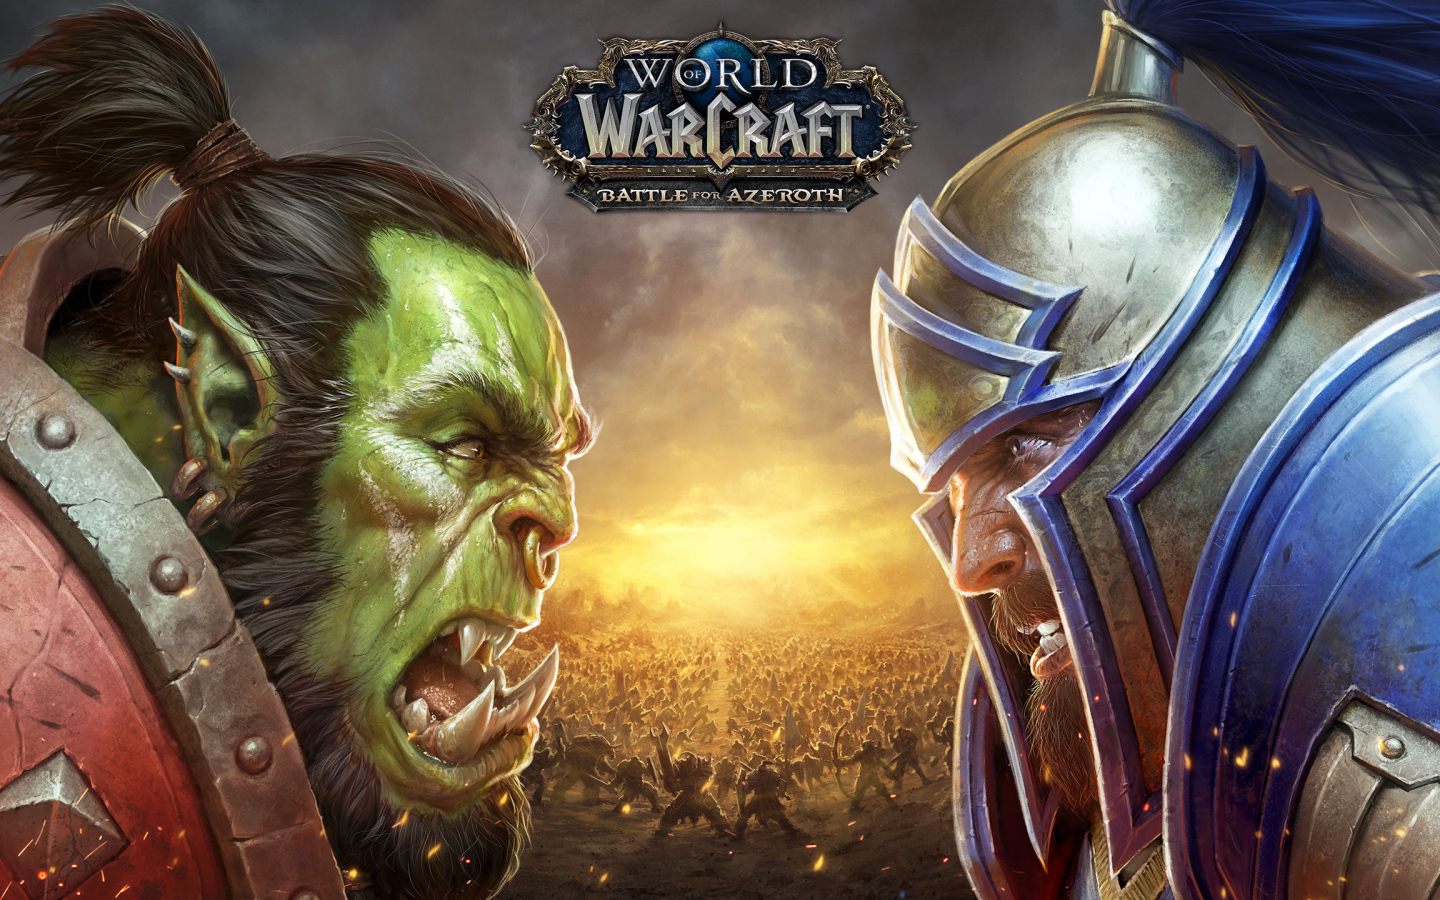 Poster of the new computer game World of Warcraft. Battle for Azeroth, 2018